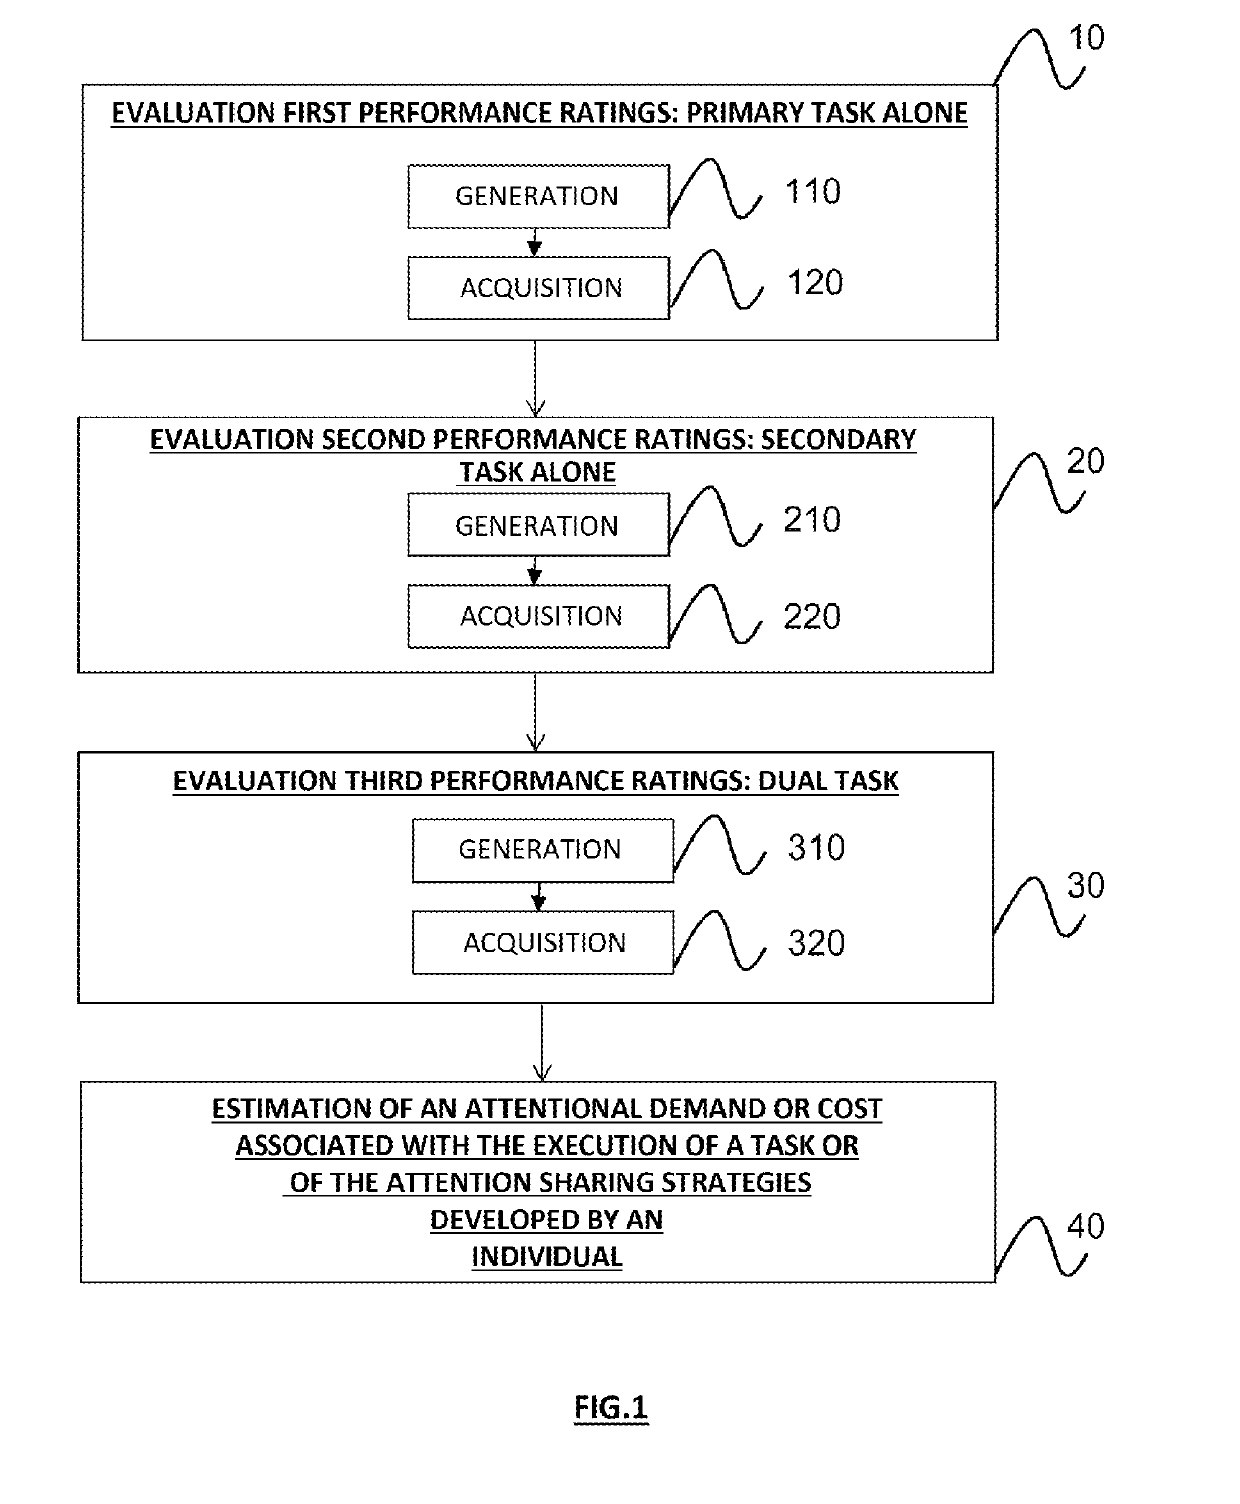 Method and system for estimating a demand or an attentional cost associated with the execution of a task or attention sharing strategies developed by an individual